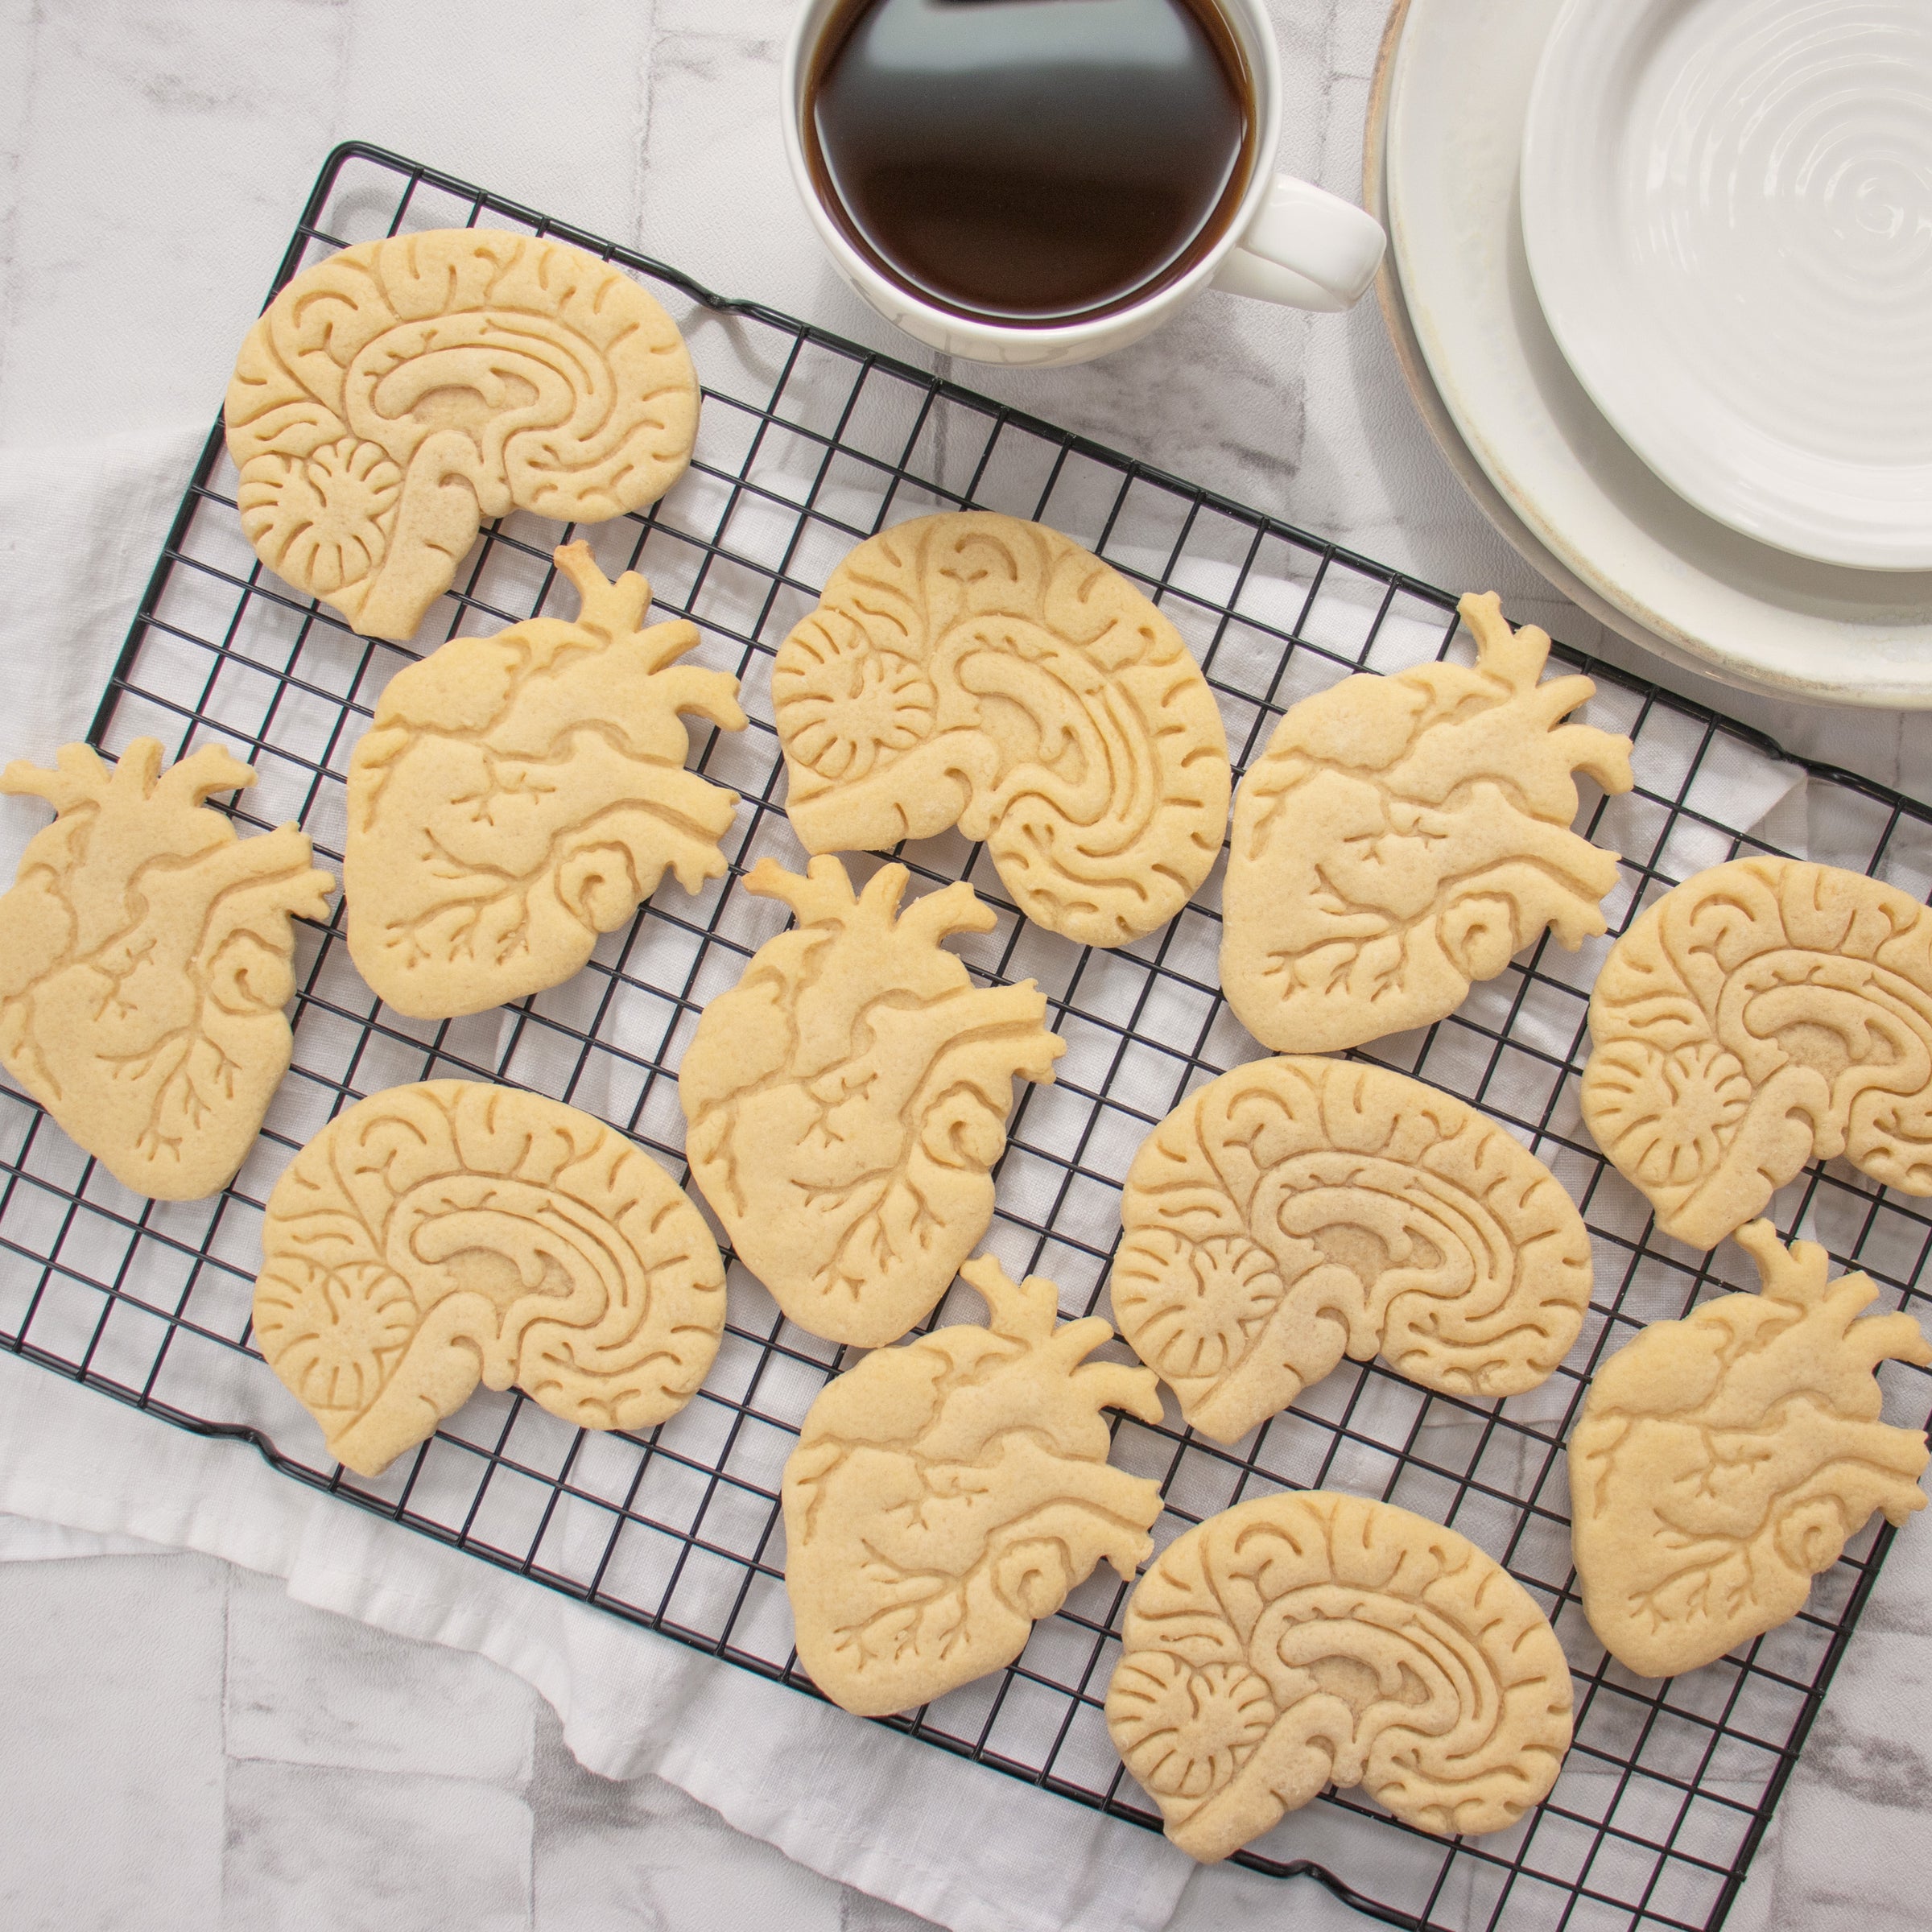 anatomical heart and anatomical brain cookies on a plate